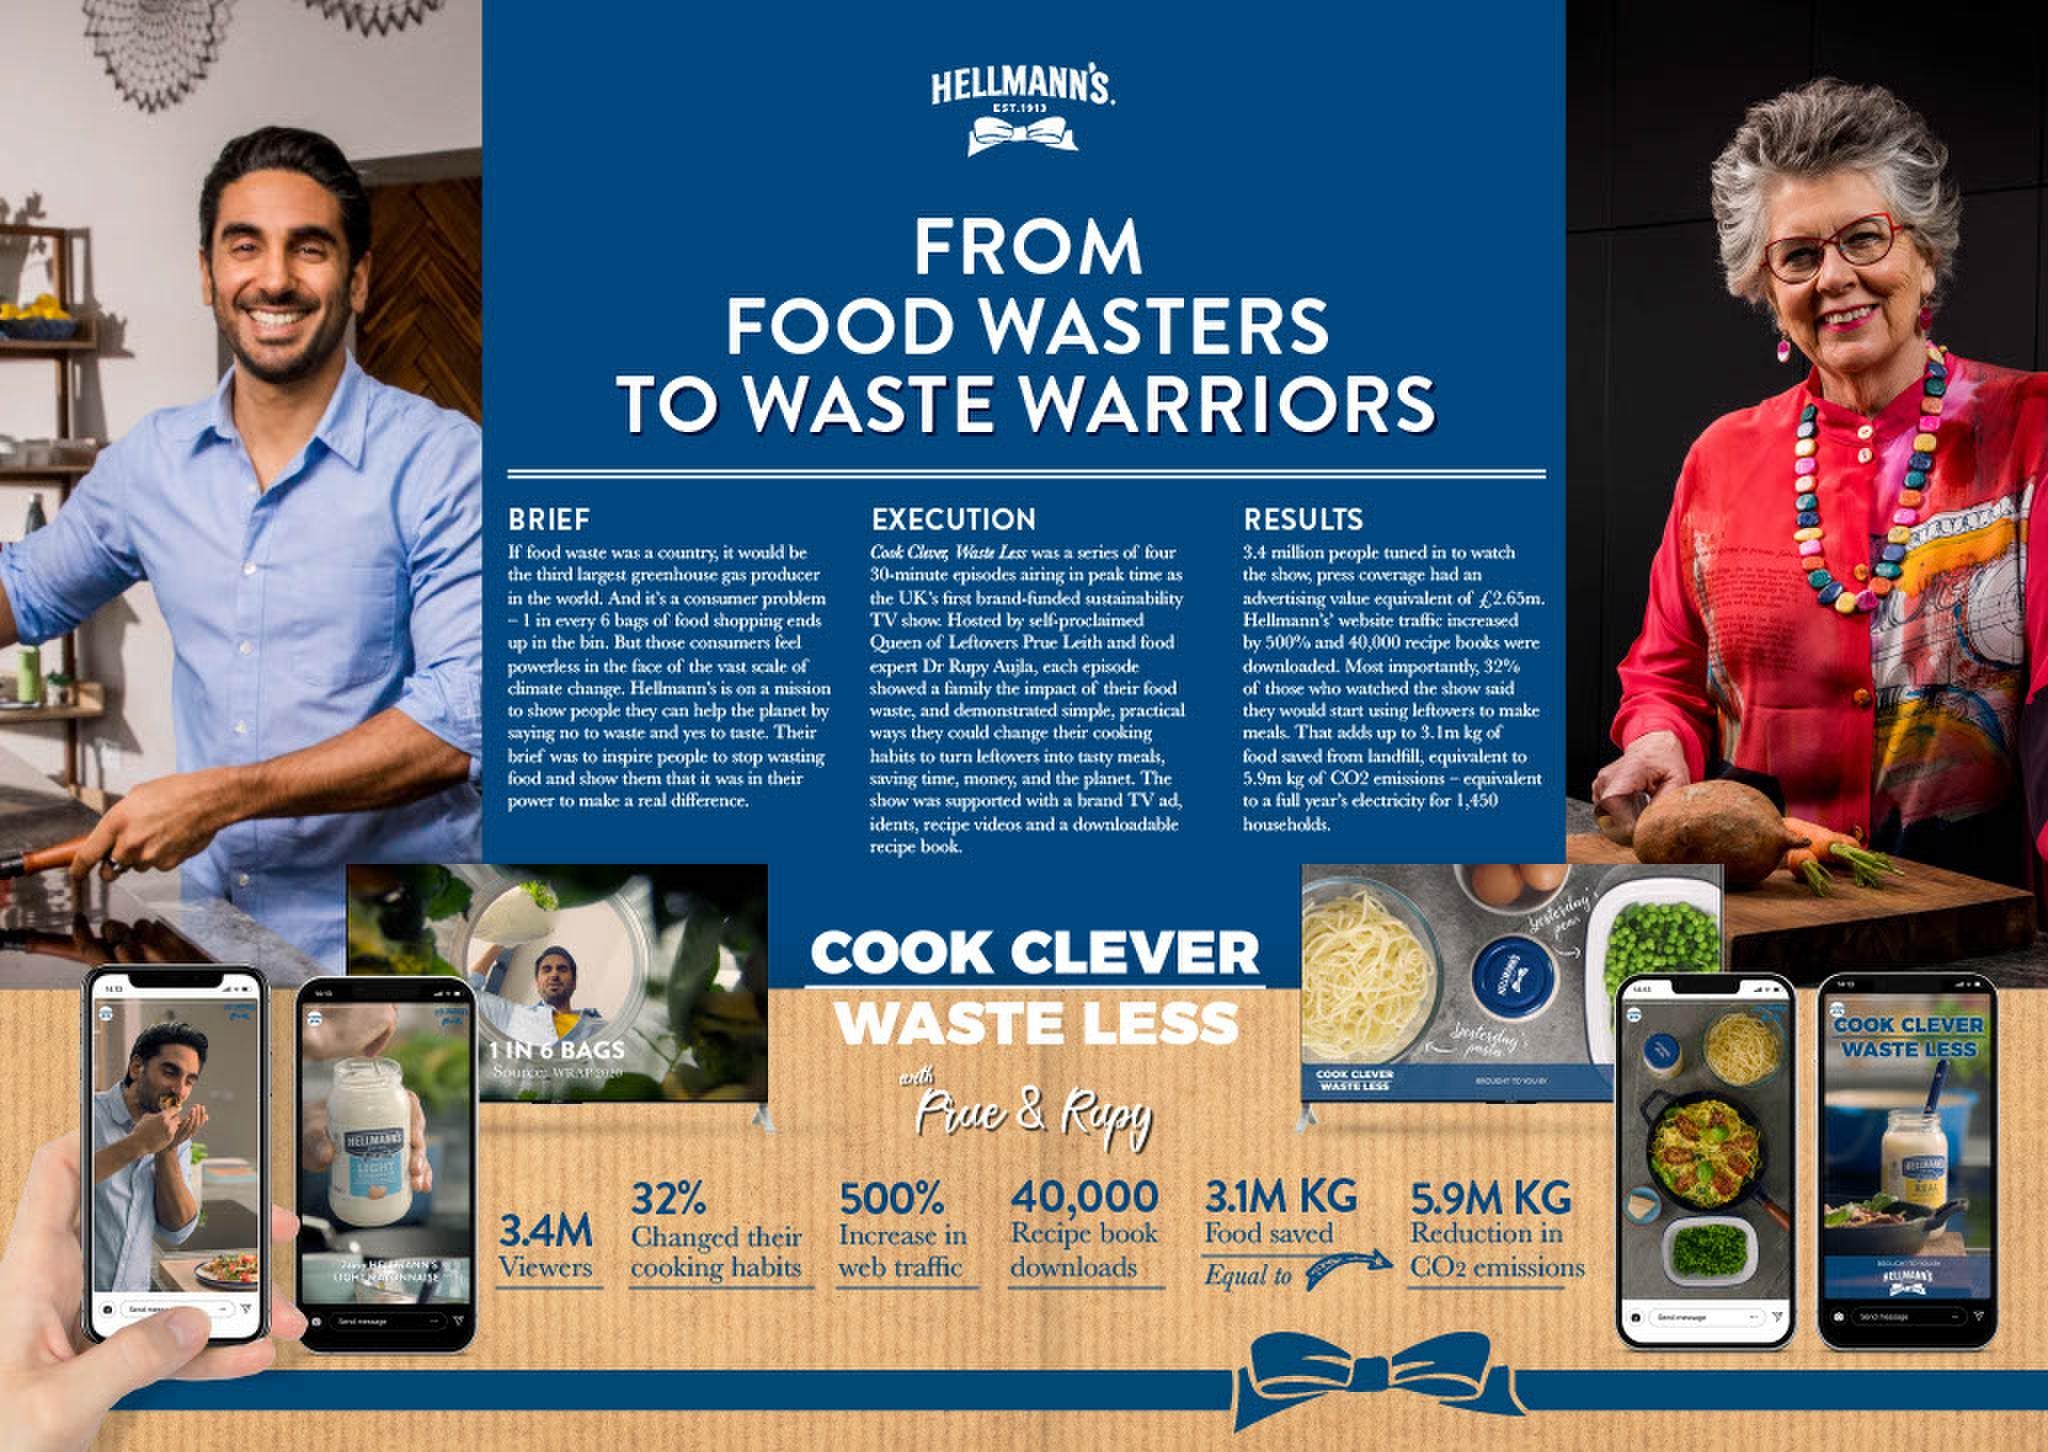 Hellmann's Cook Clever Waste Less